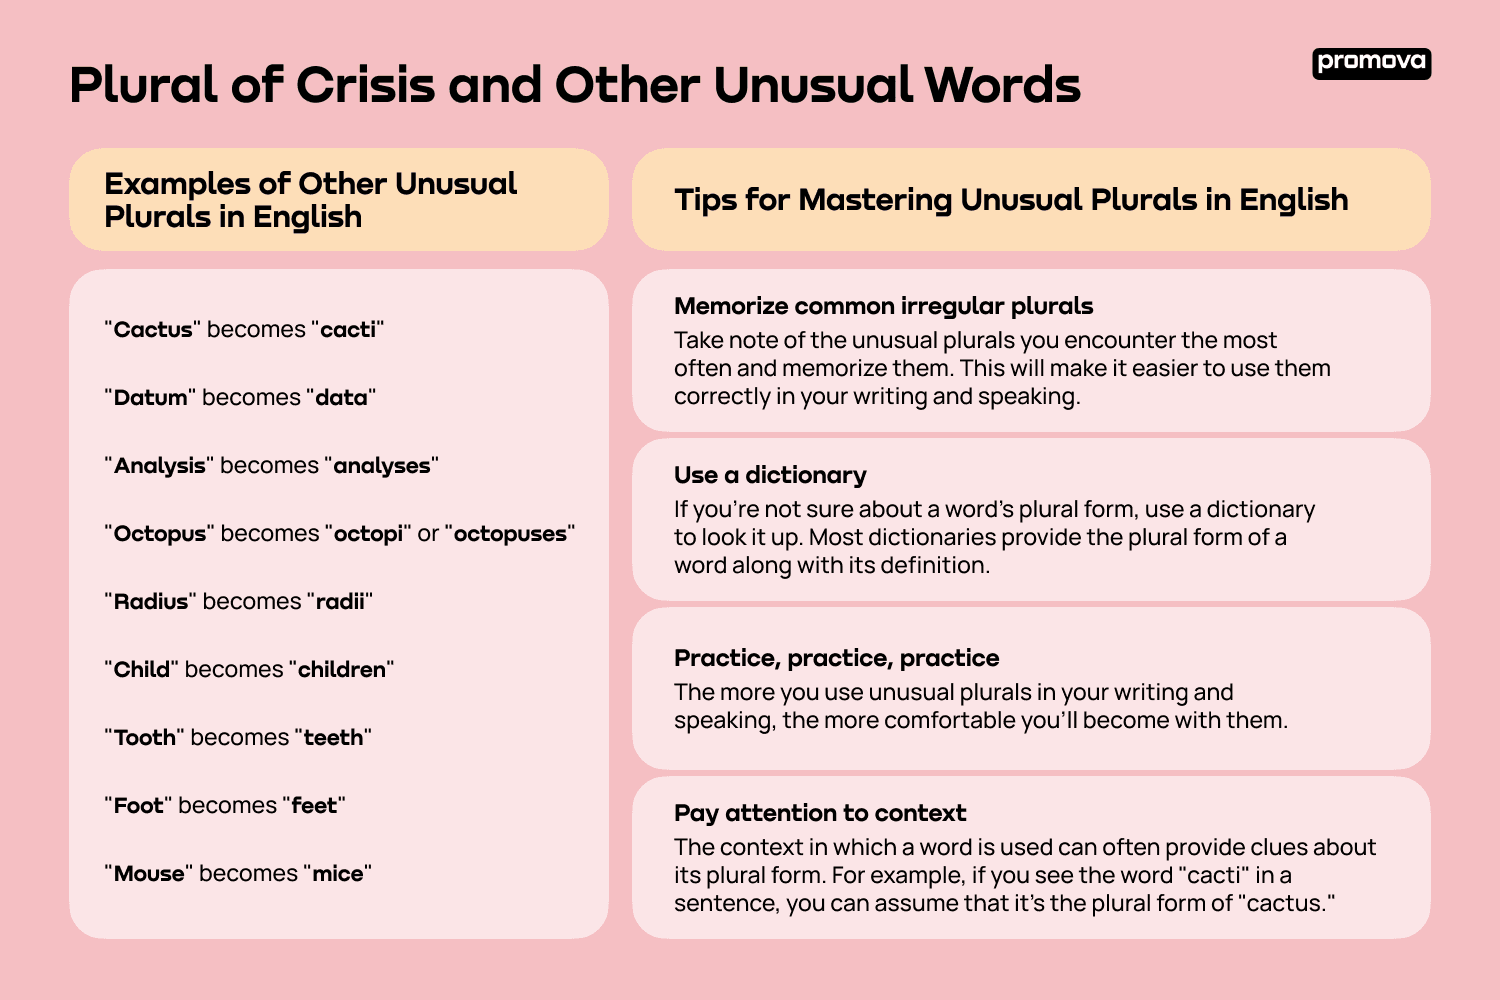 Tips for Mastering Unusual Plurals in English